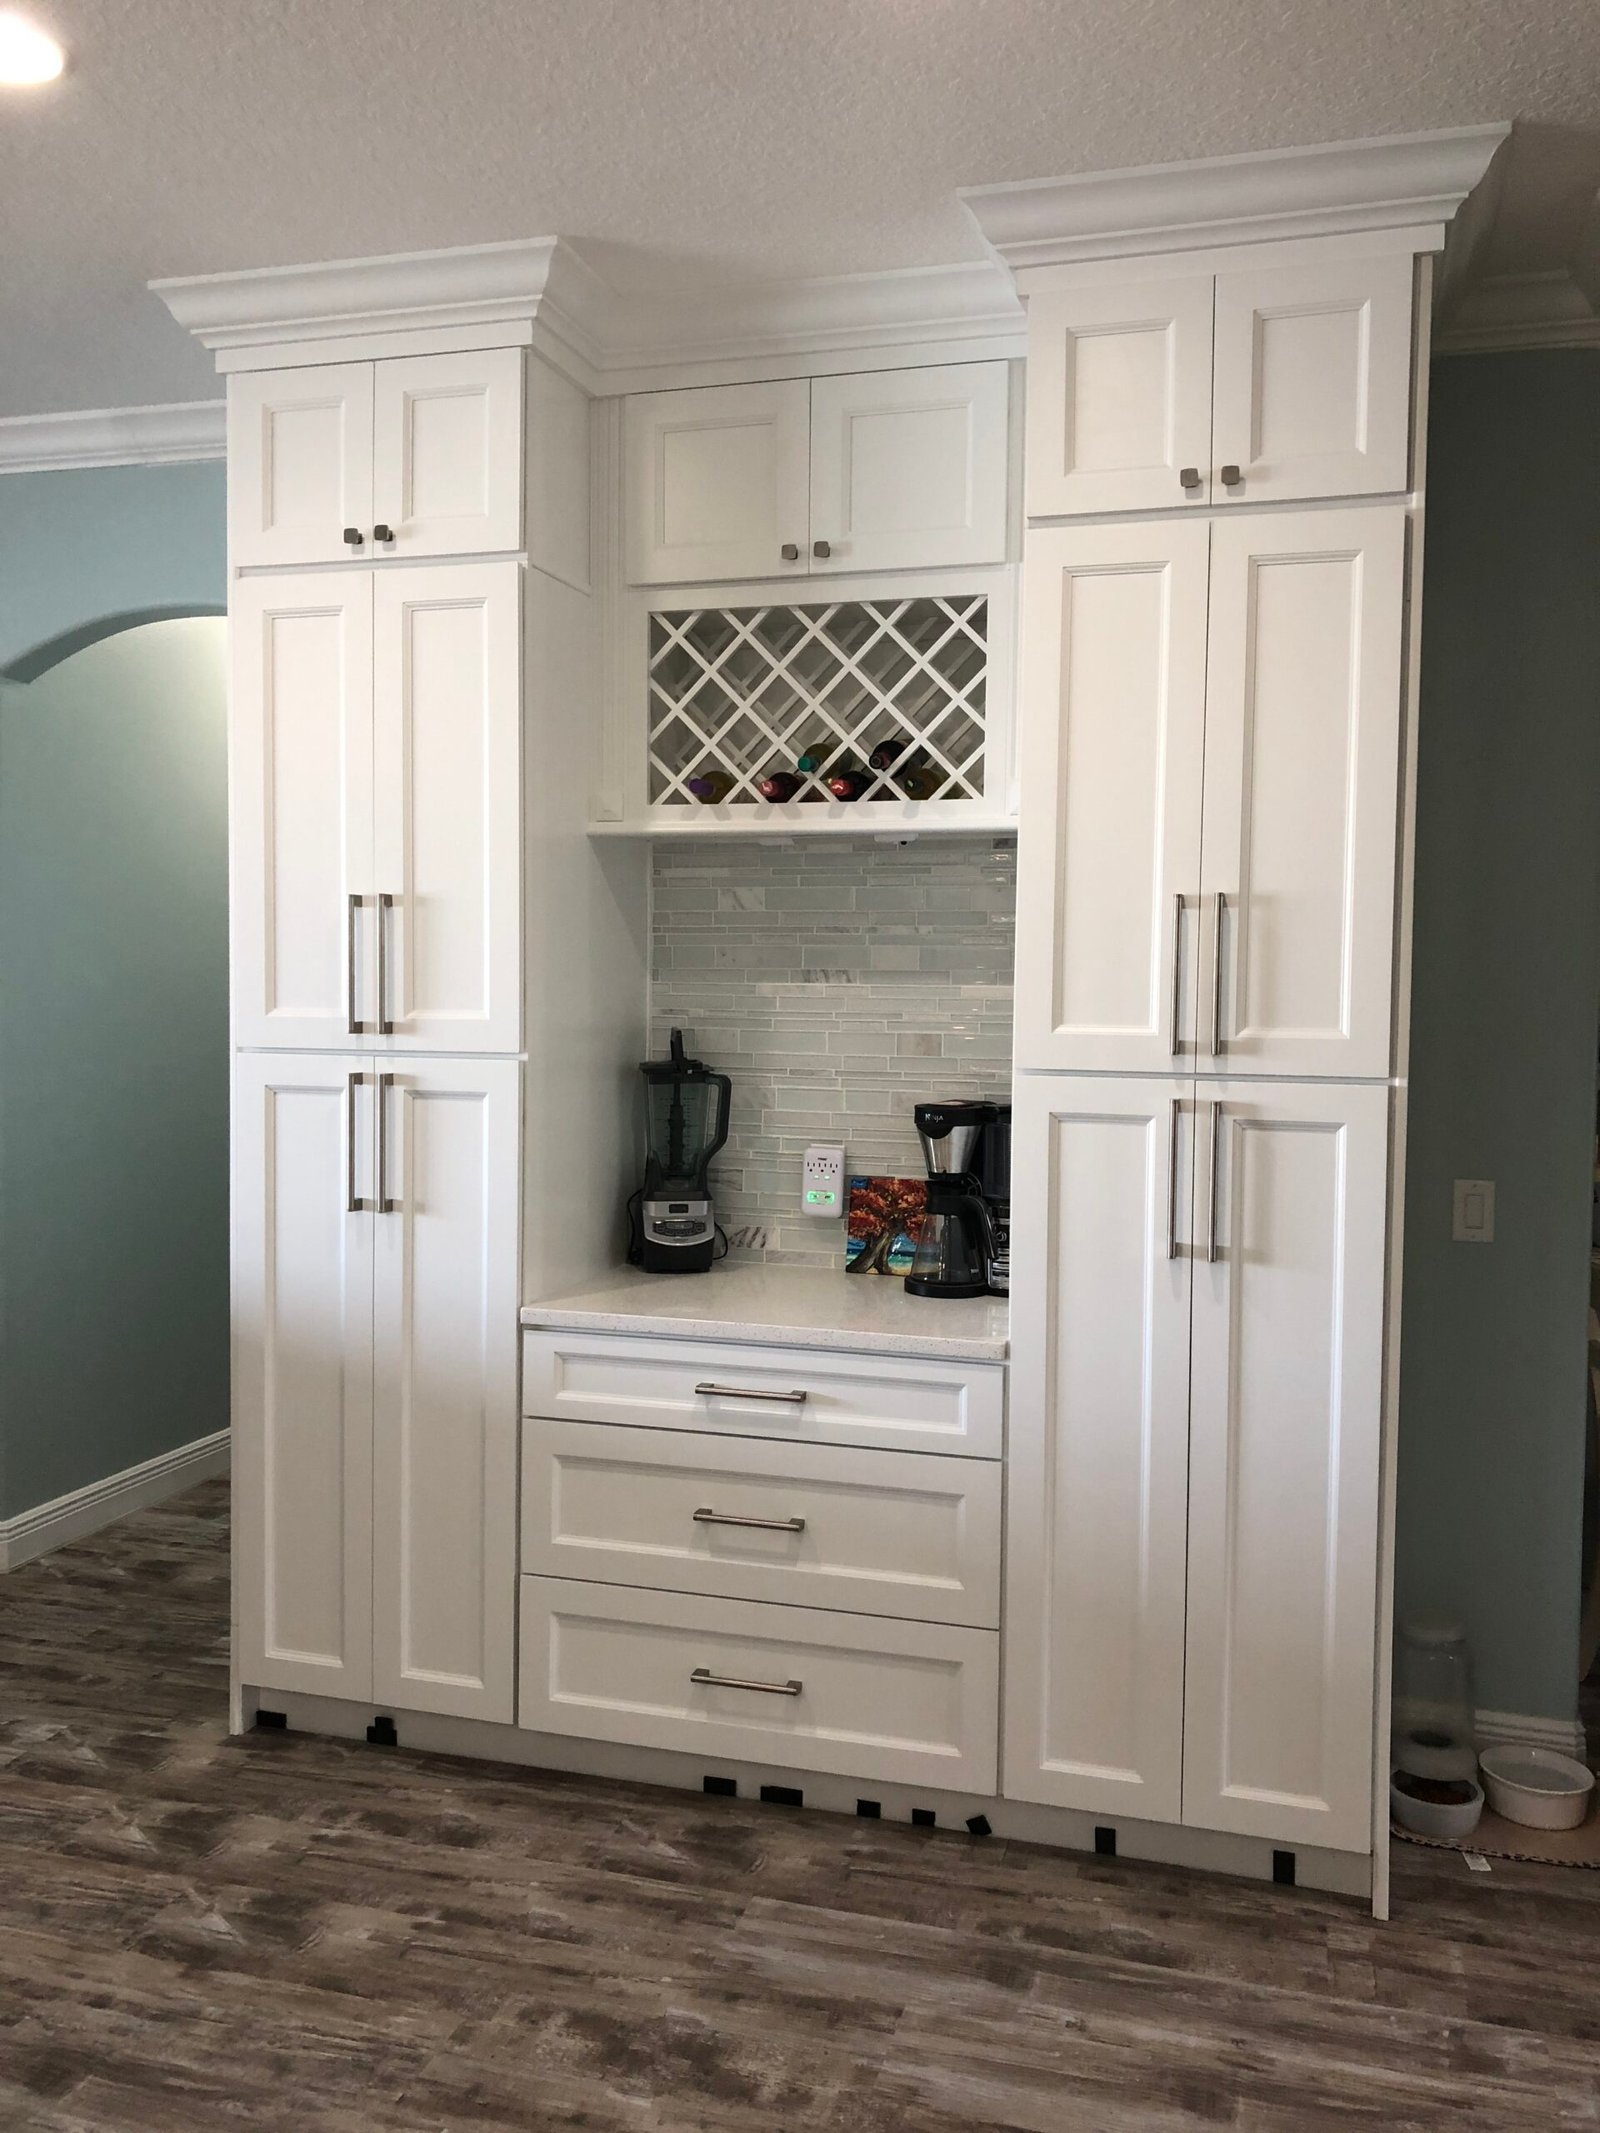 custom cabinets installed in a home